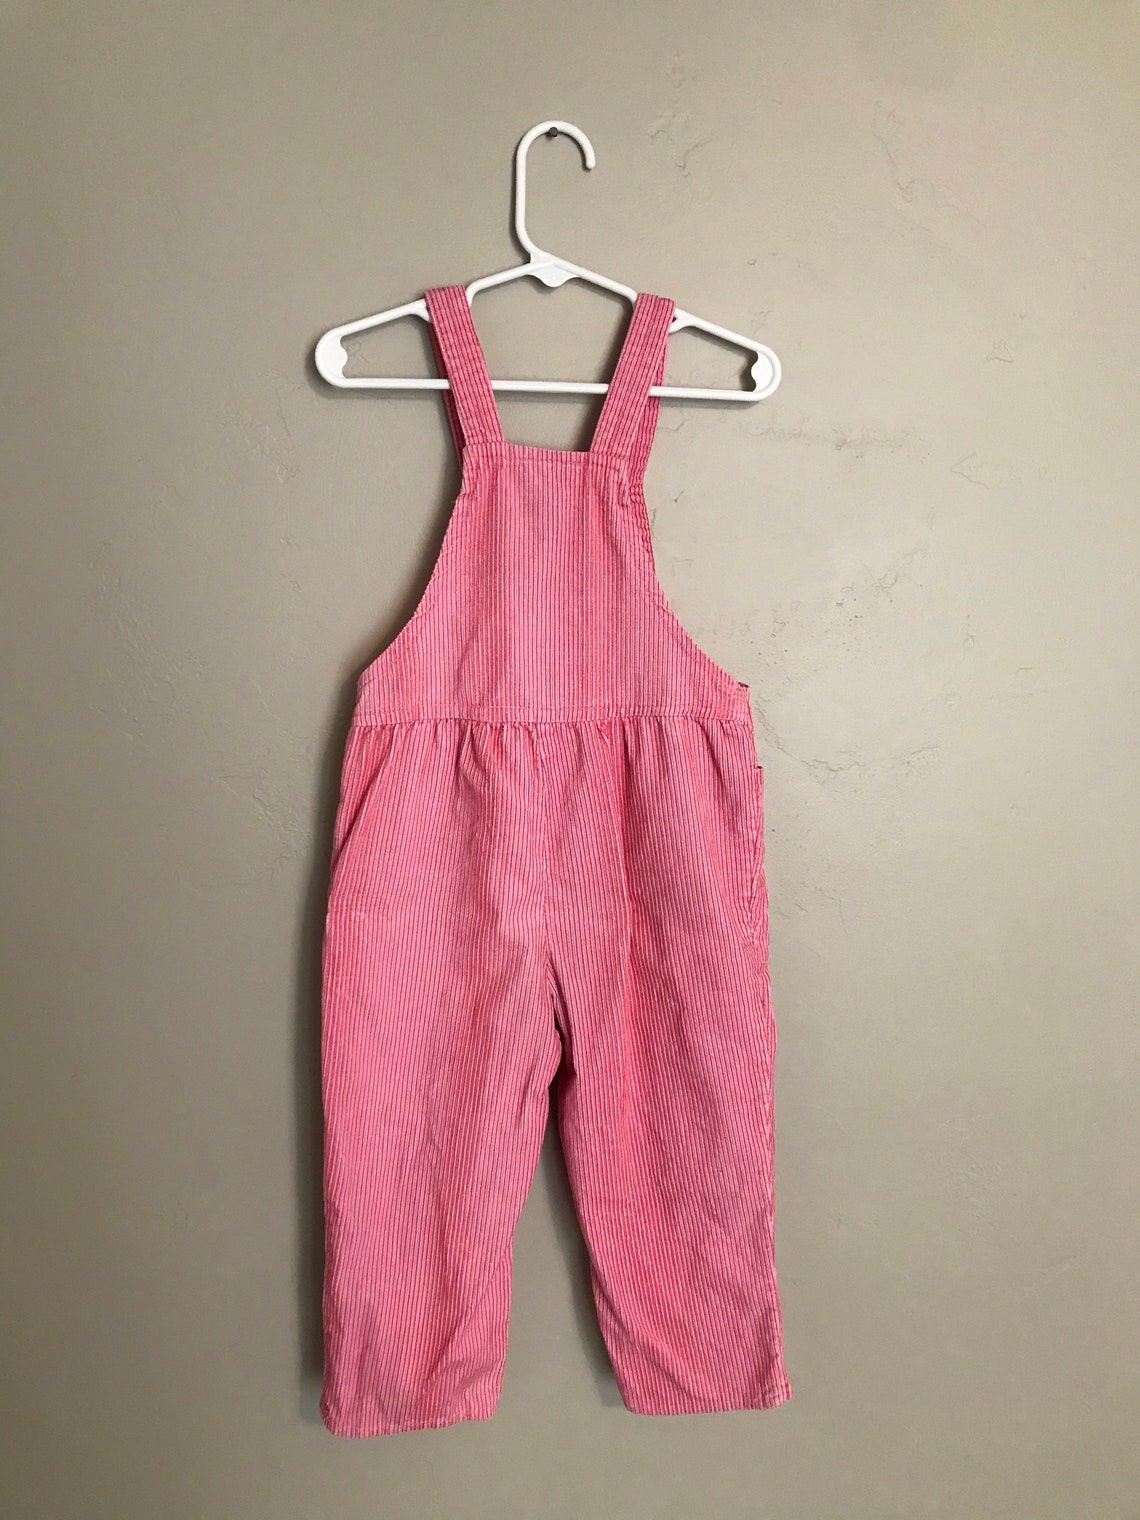 Vintage Toddler Corduroy Overalls pink girls overalls with | Etsy